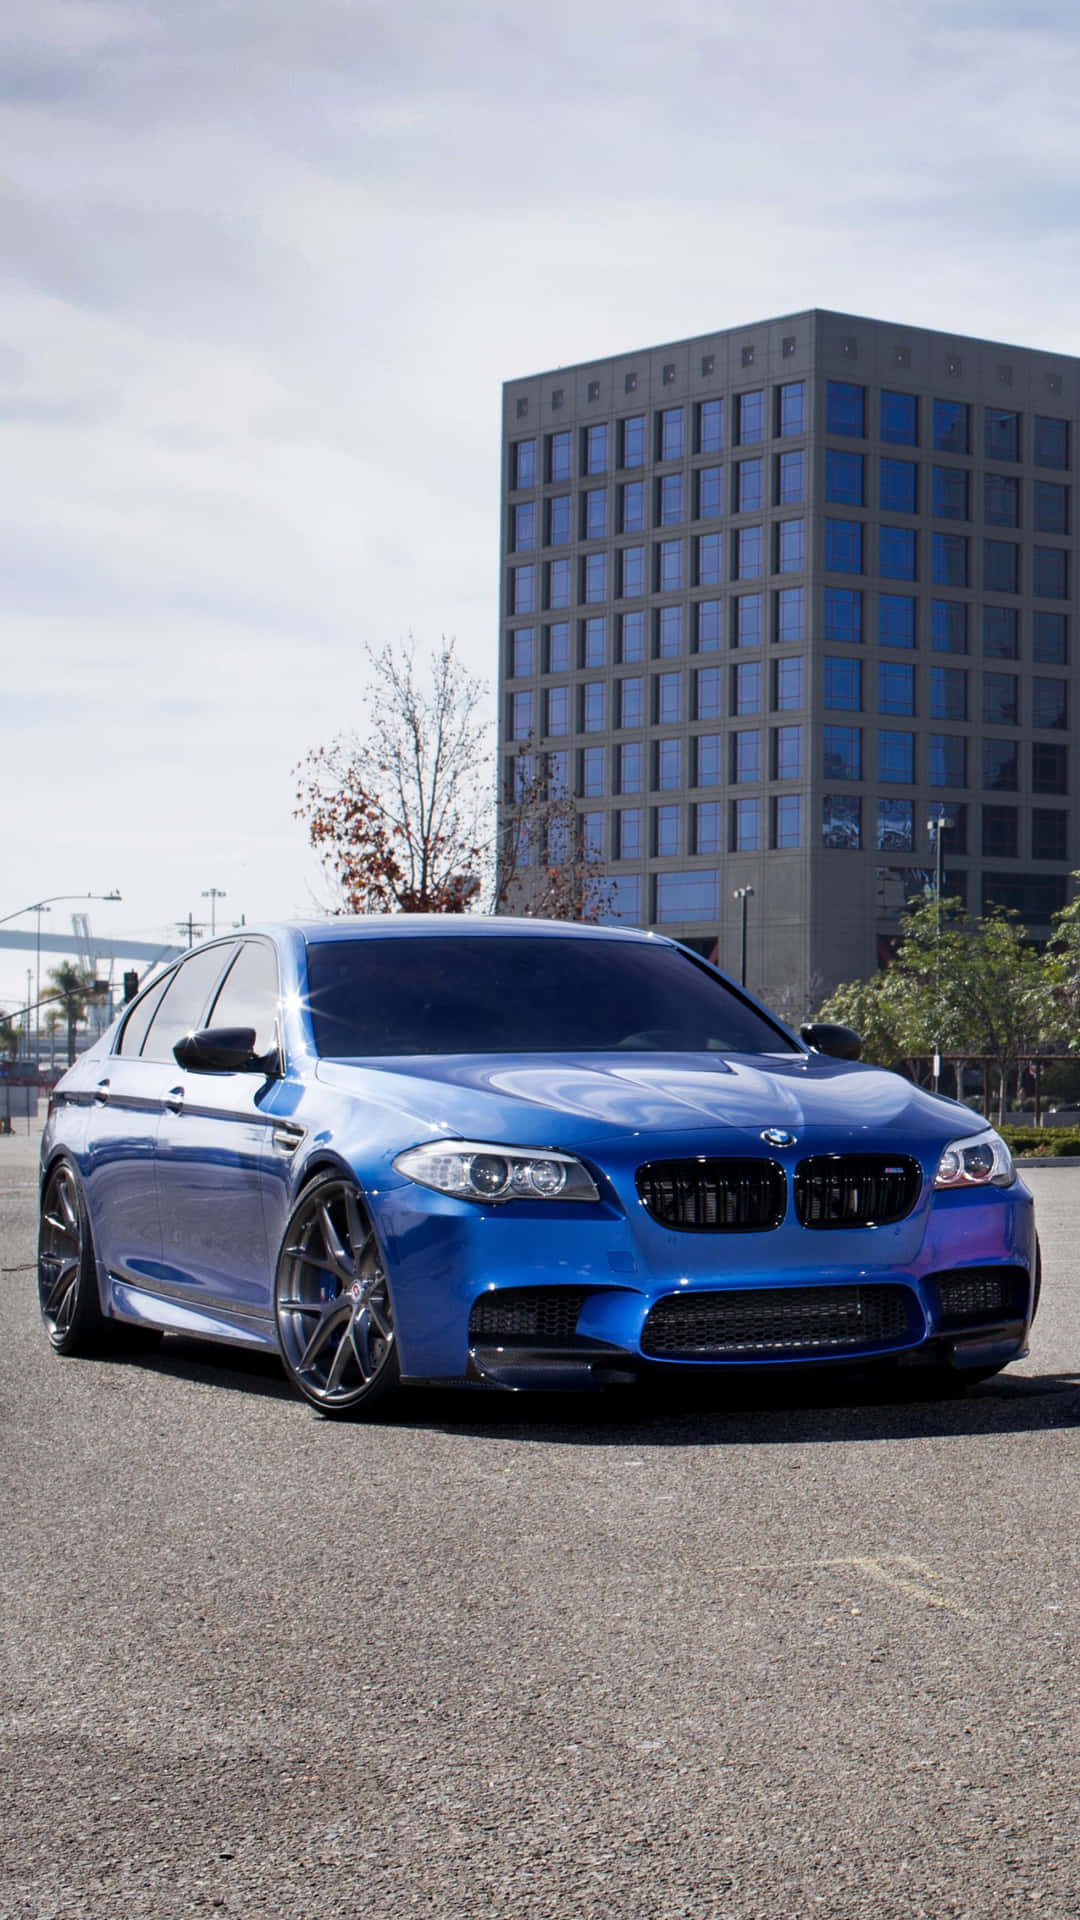 Show off your style with the BMW iPhone Wallpaper